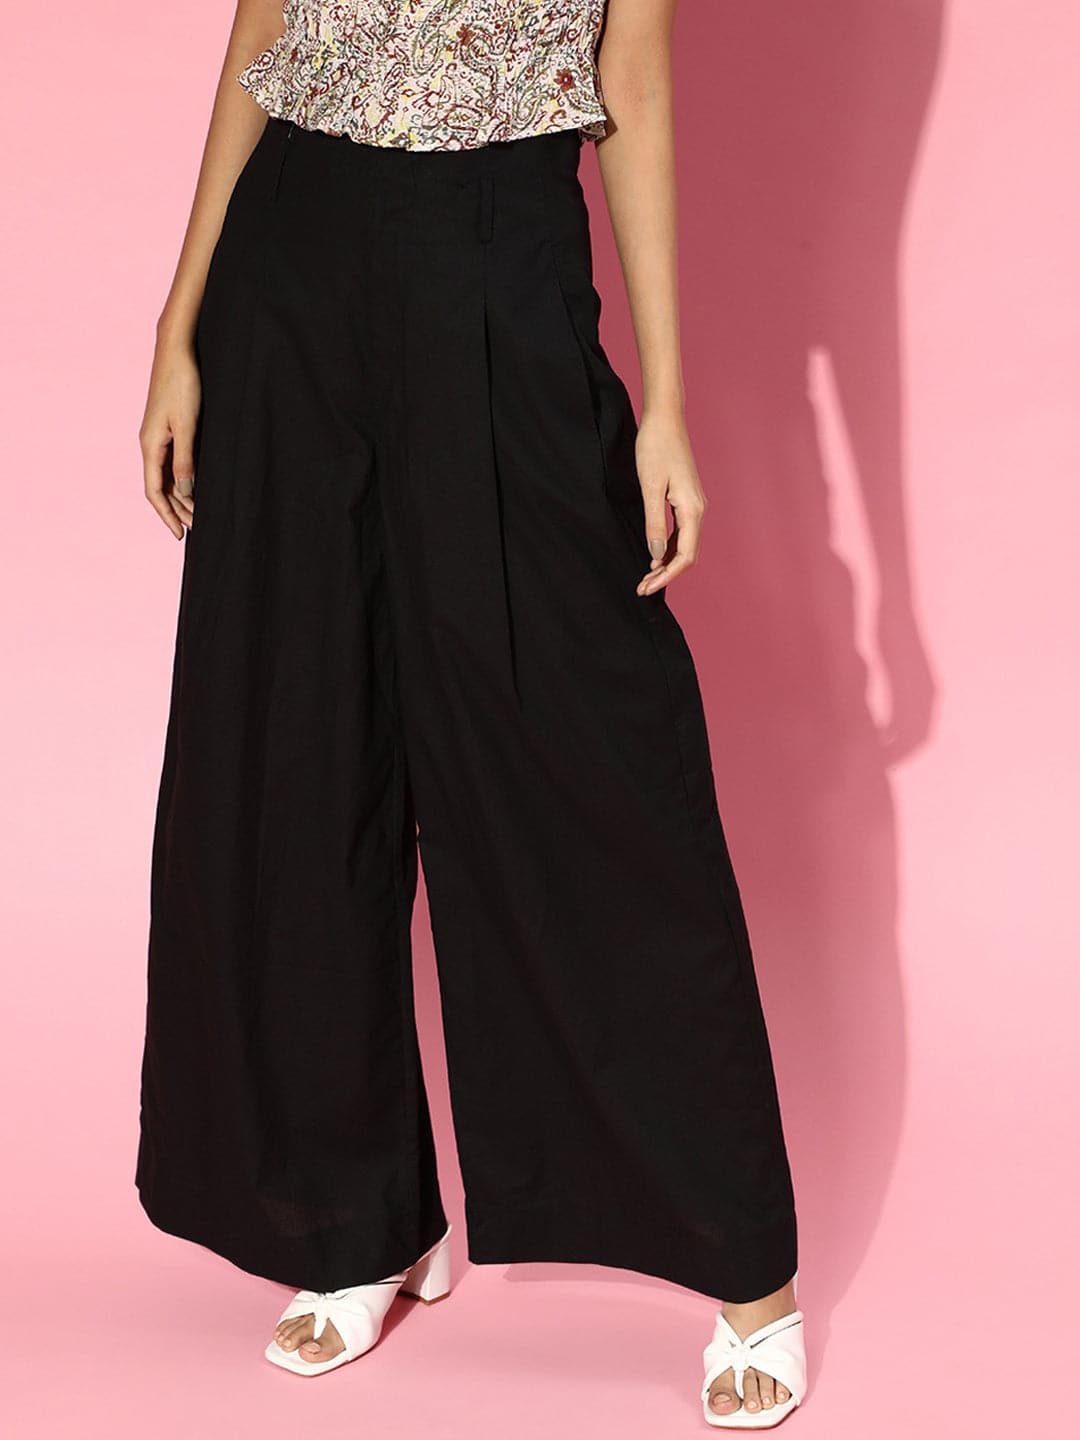 Buy Go Colors-black-palazzo Pants Online at Low Prices in India